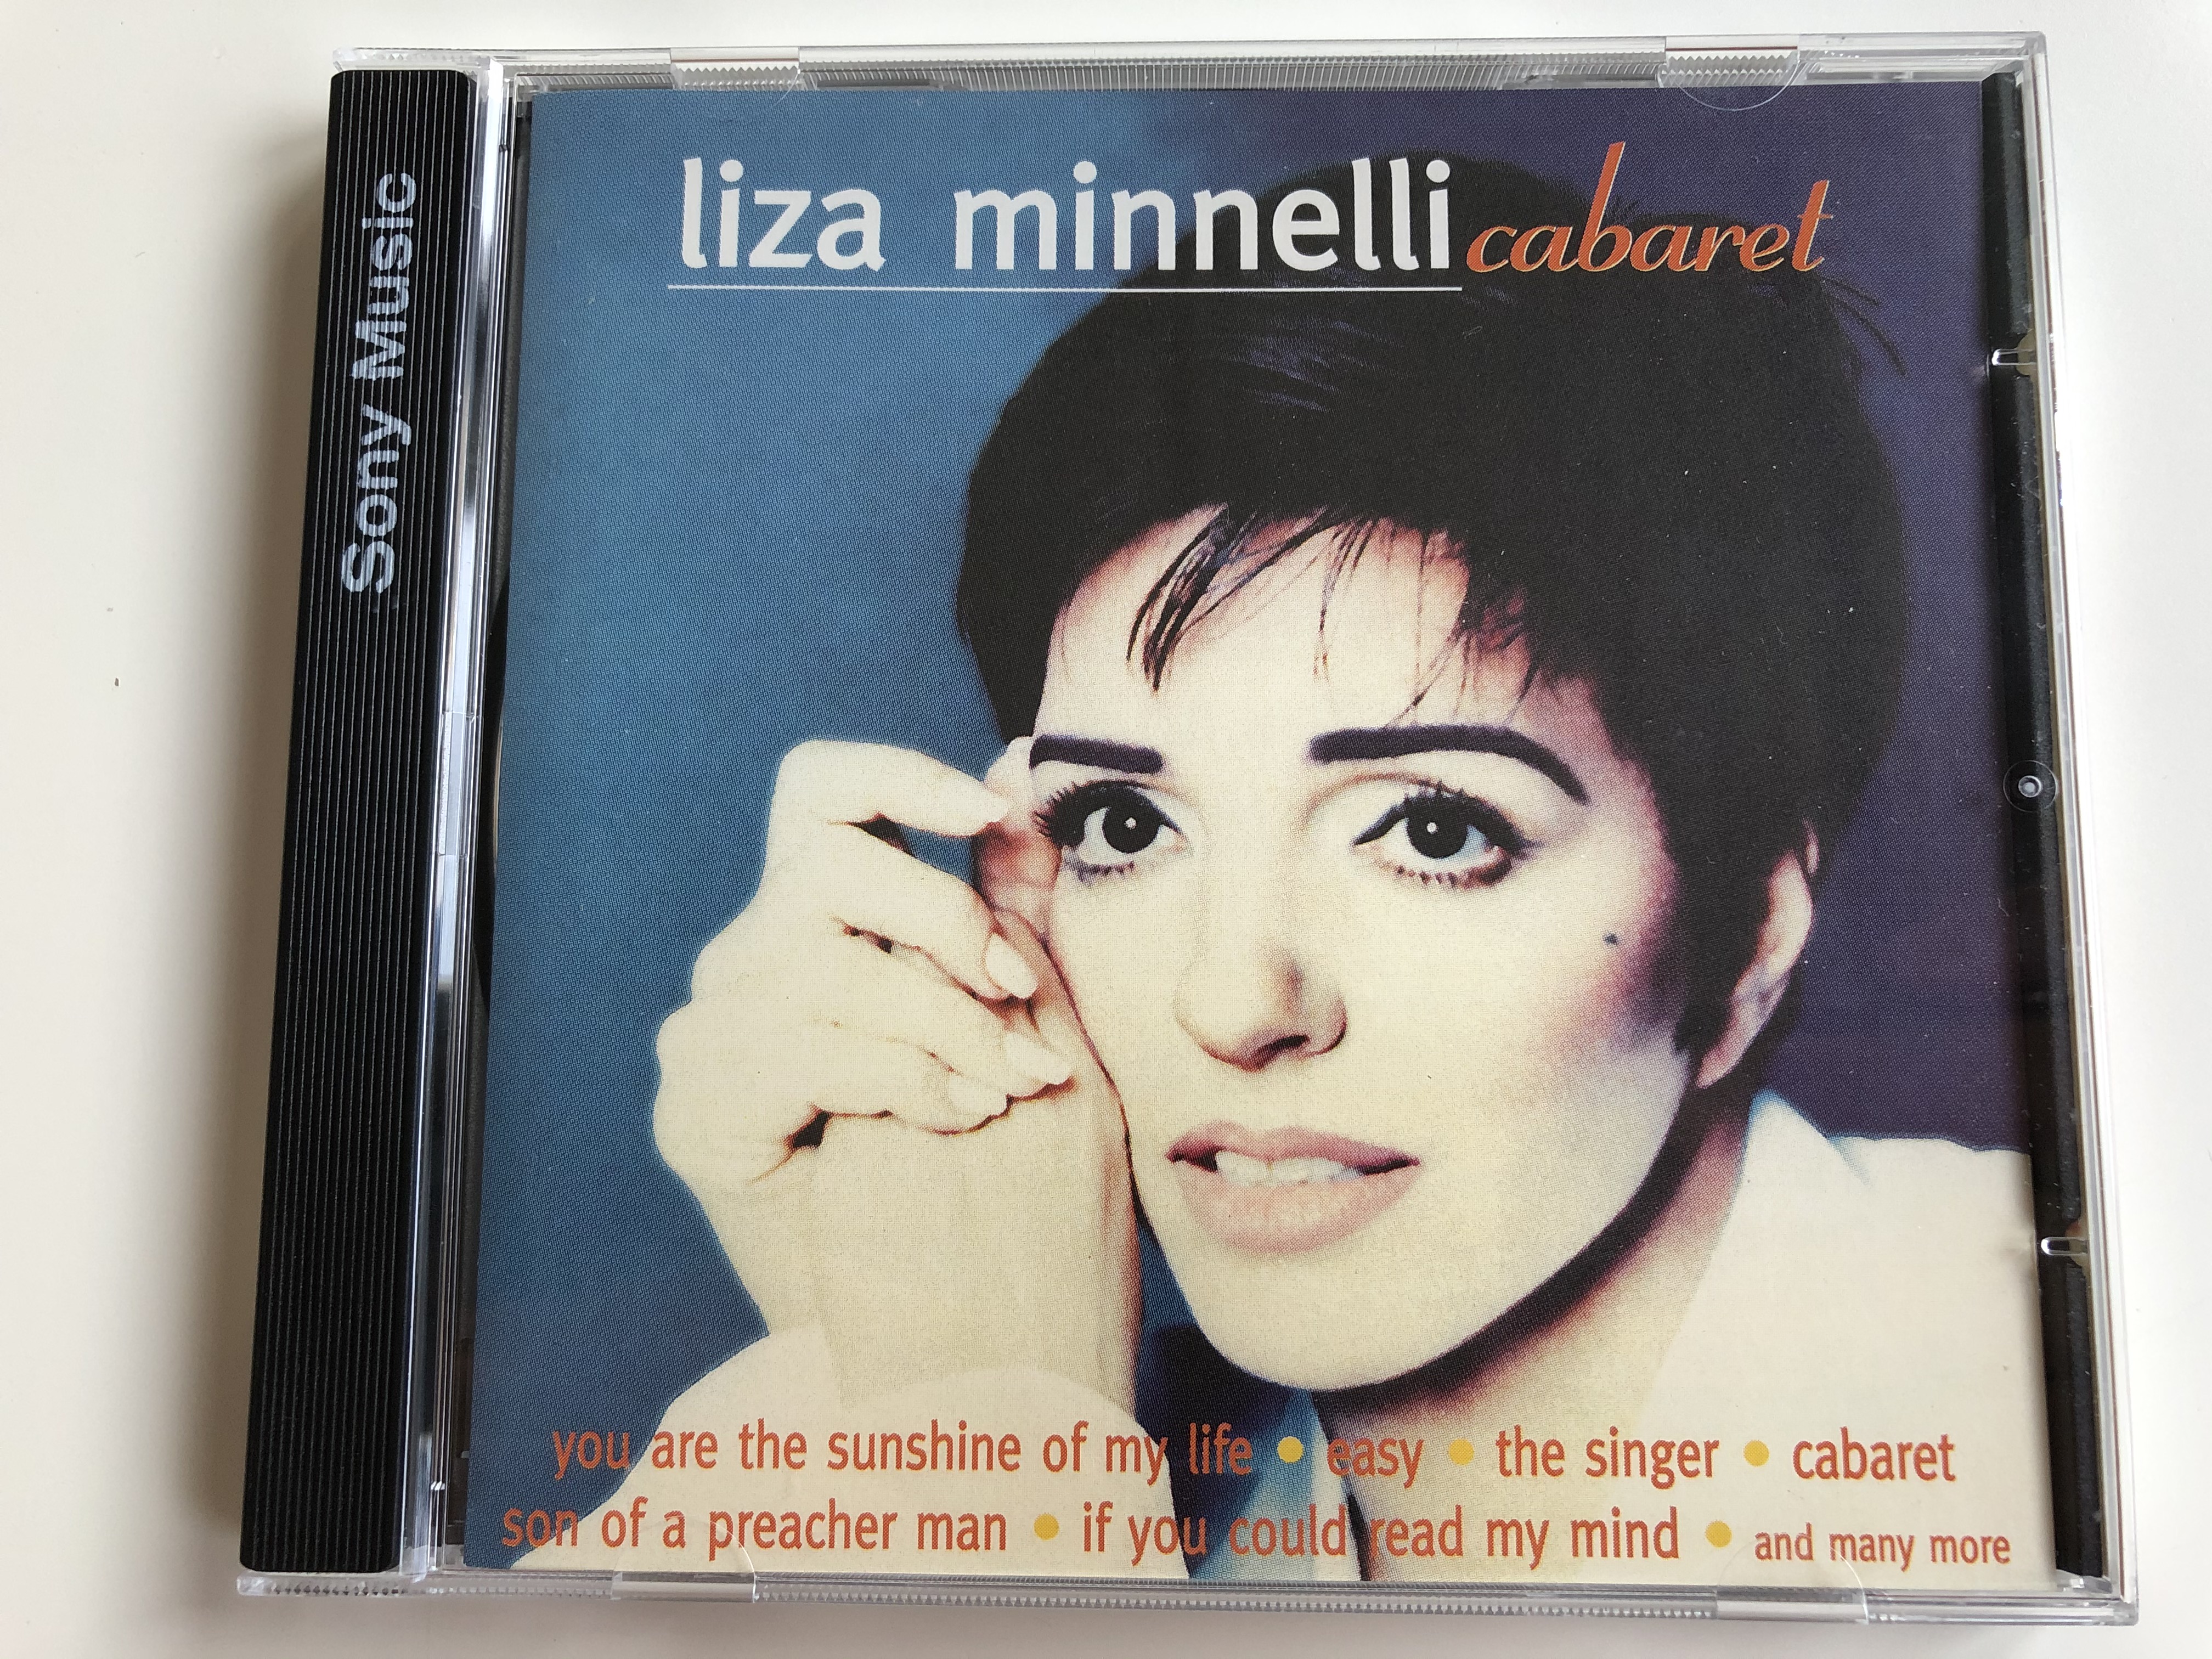 liza-minnelli-cabaret-you-are-the-sunshine-of-my-life-easy-the-singer-cabaret-son-of-a-preacher-man-if-you-could-read-my-mind-and-many-more-columbia-audio-cd-1995-col-466117-2-1-.jpg